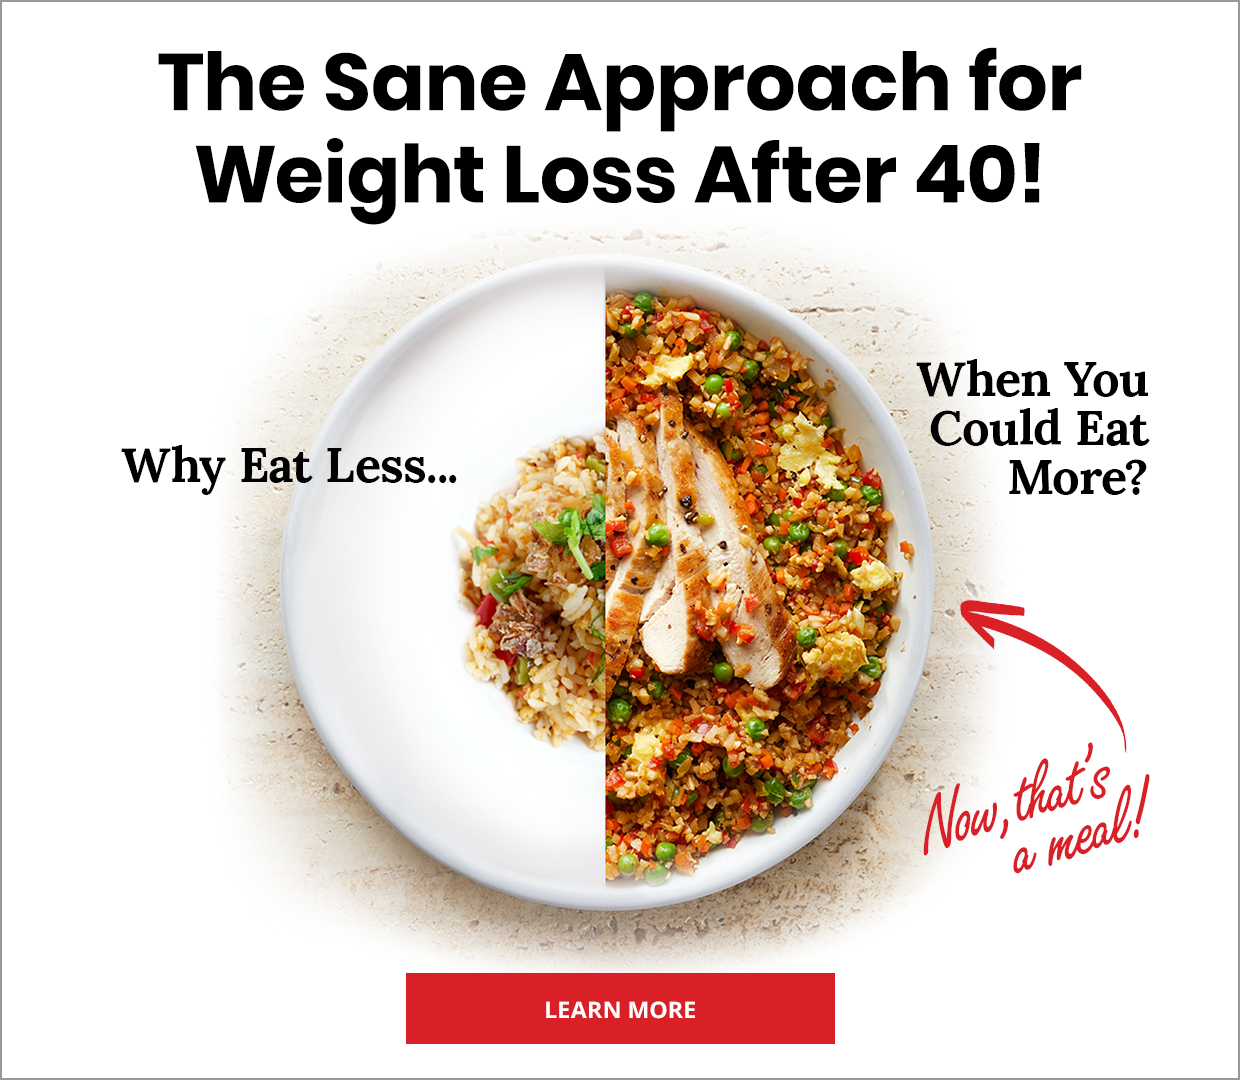 Lose weight without hunger! Learn how to eat more to weigh less.